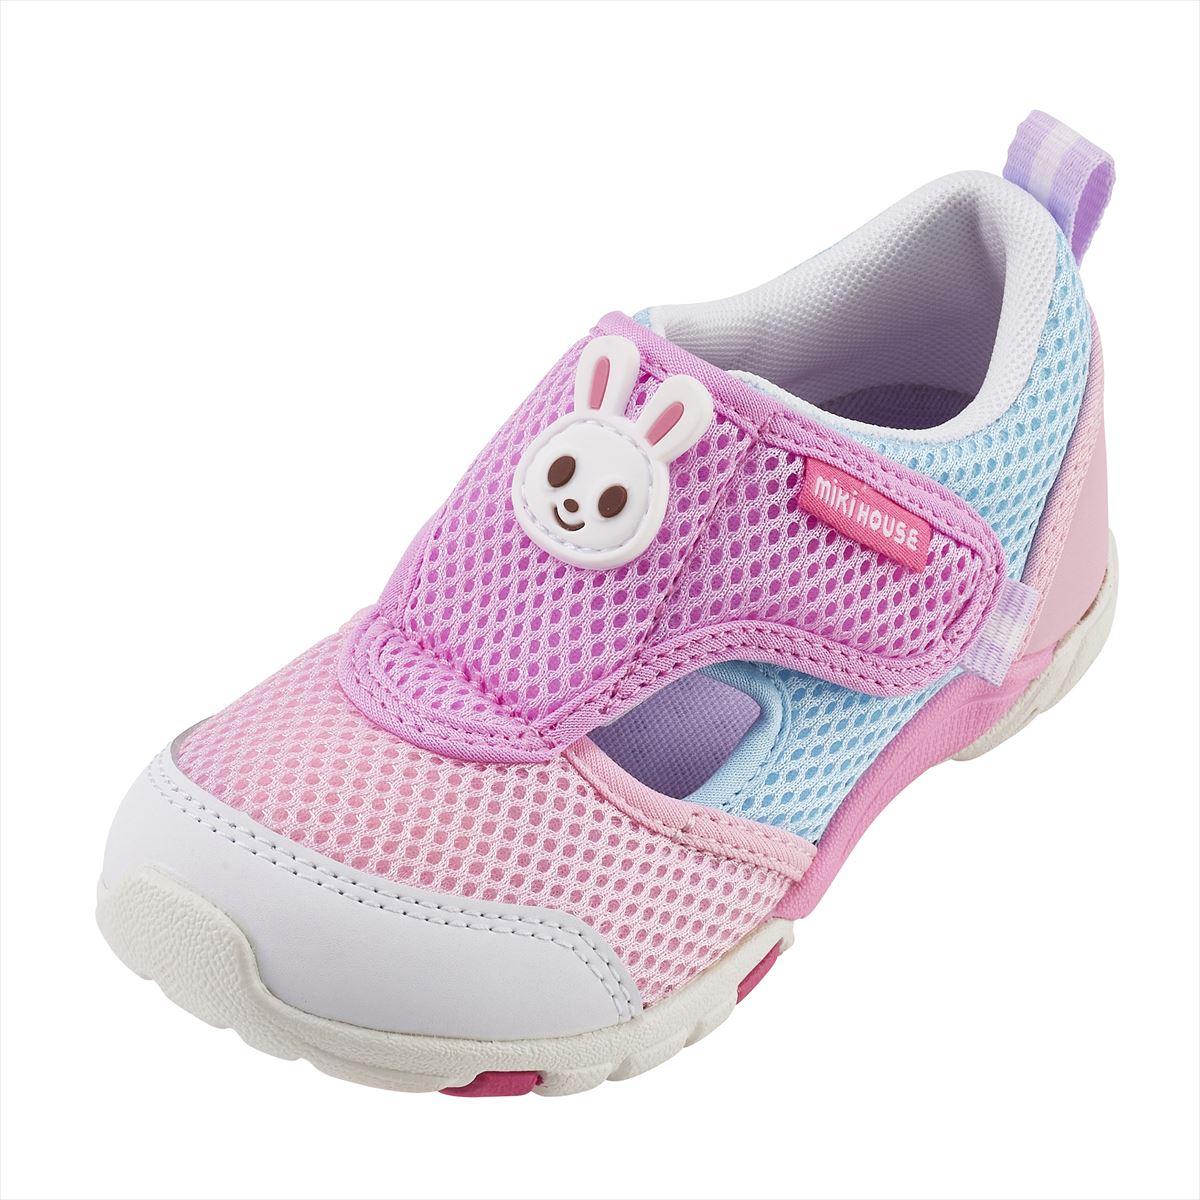 Double Russell Mesh Sneakers for Kids - Lavender Dreams – MIKI 